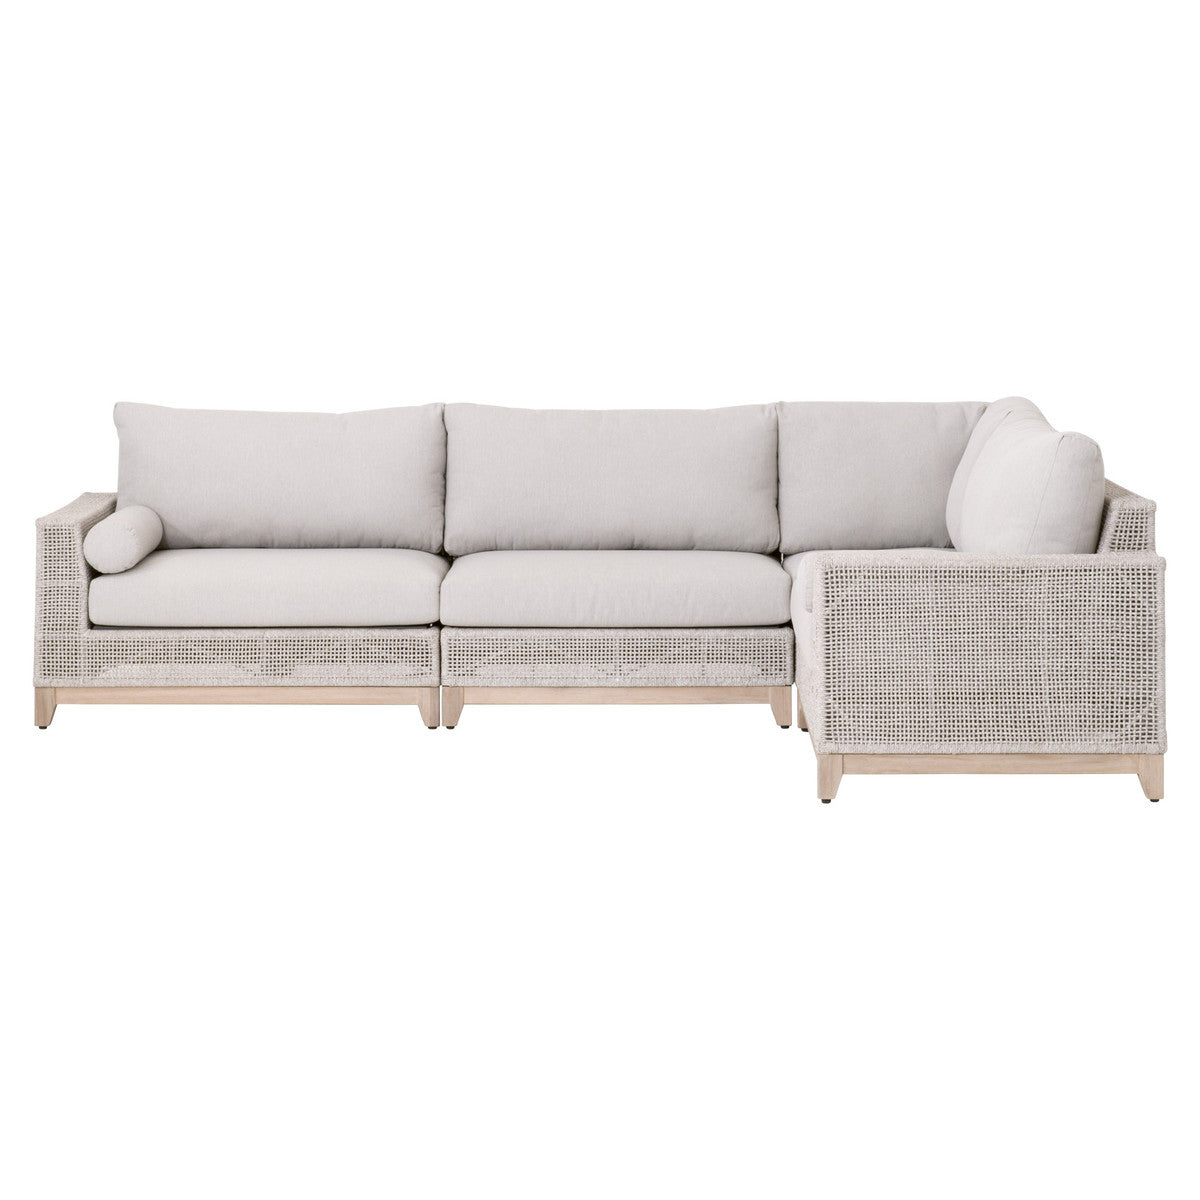 Tropez Outdoor Modular Left Facing 1-Arm Sofa in Taupe & White Flat Rope, Performance Pumice, Gray Teak - 6843-2S1L.WTA/PUM/GT